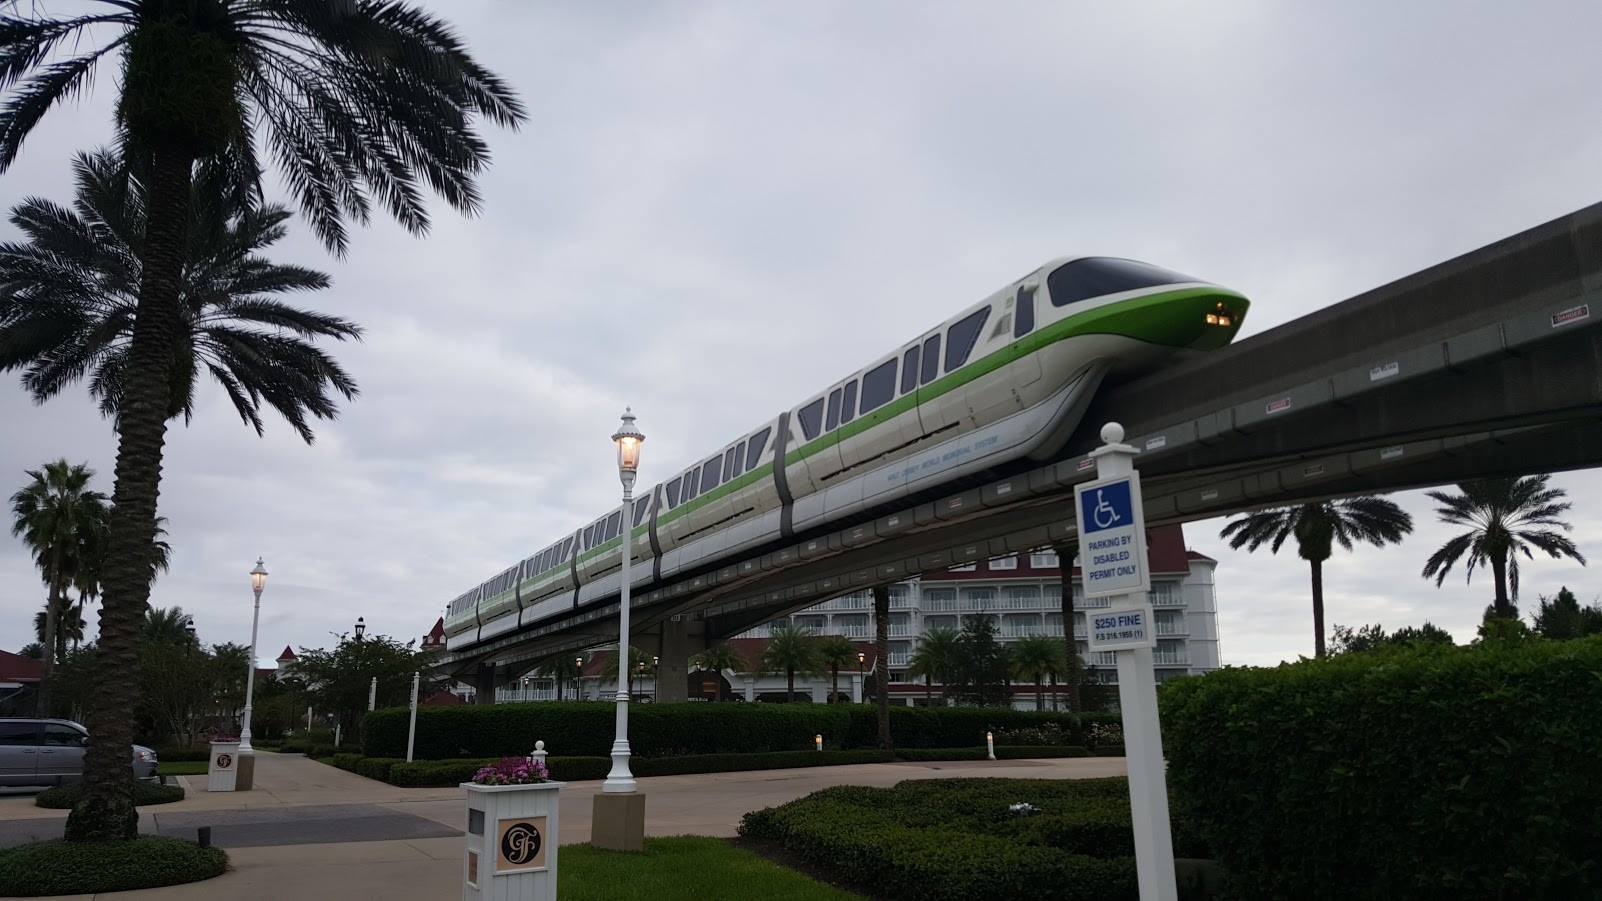 Temporary Monorail Route Changes Coming Later This Month